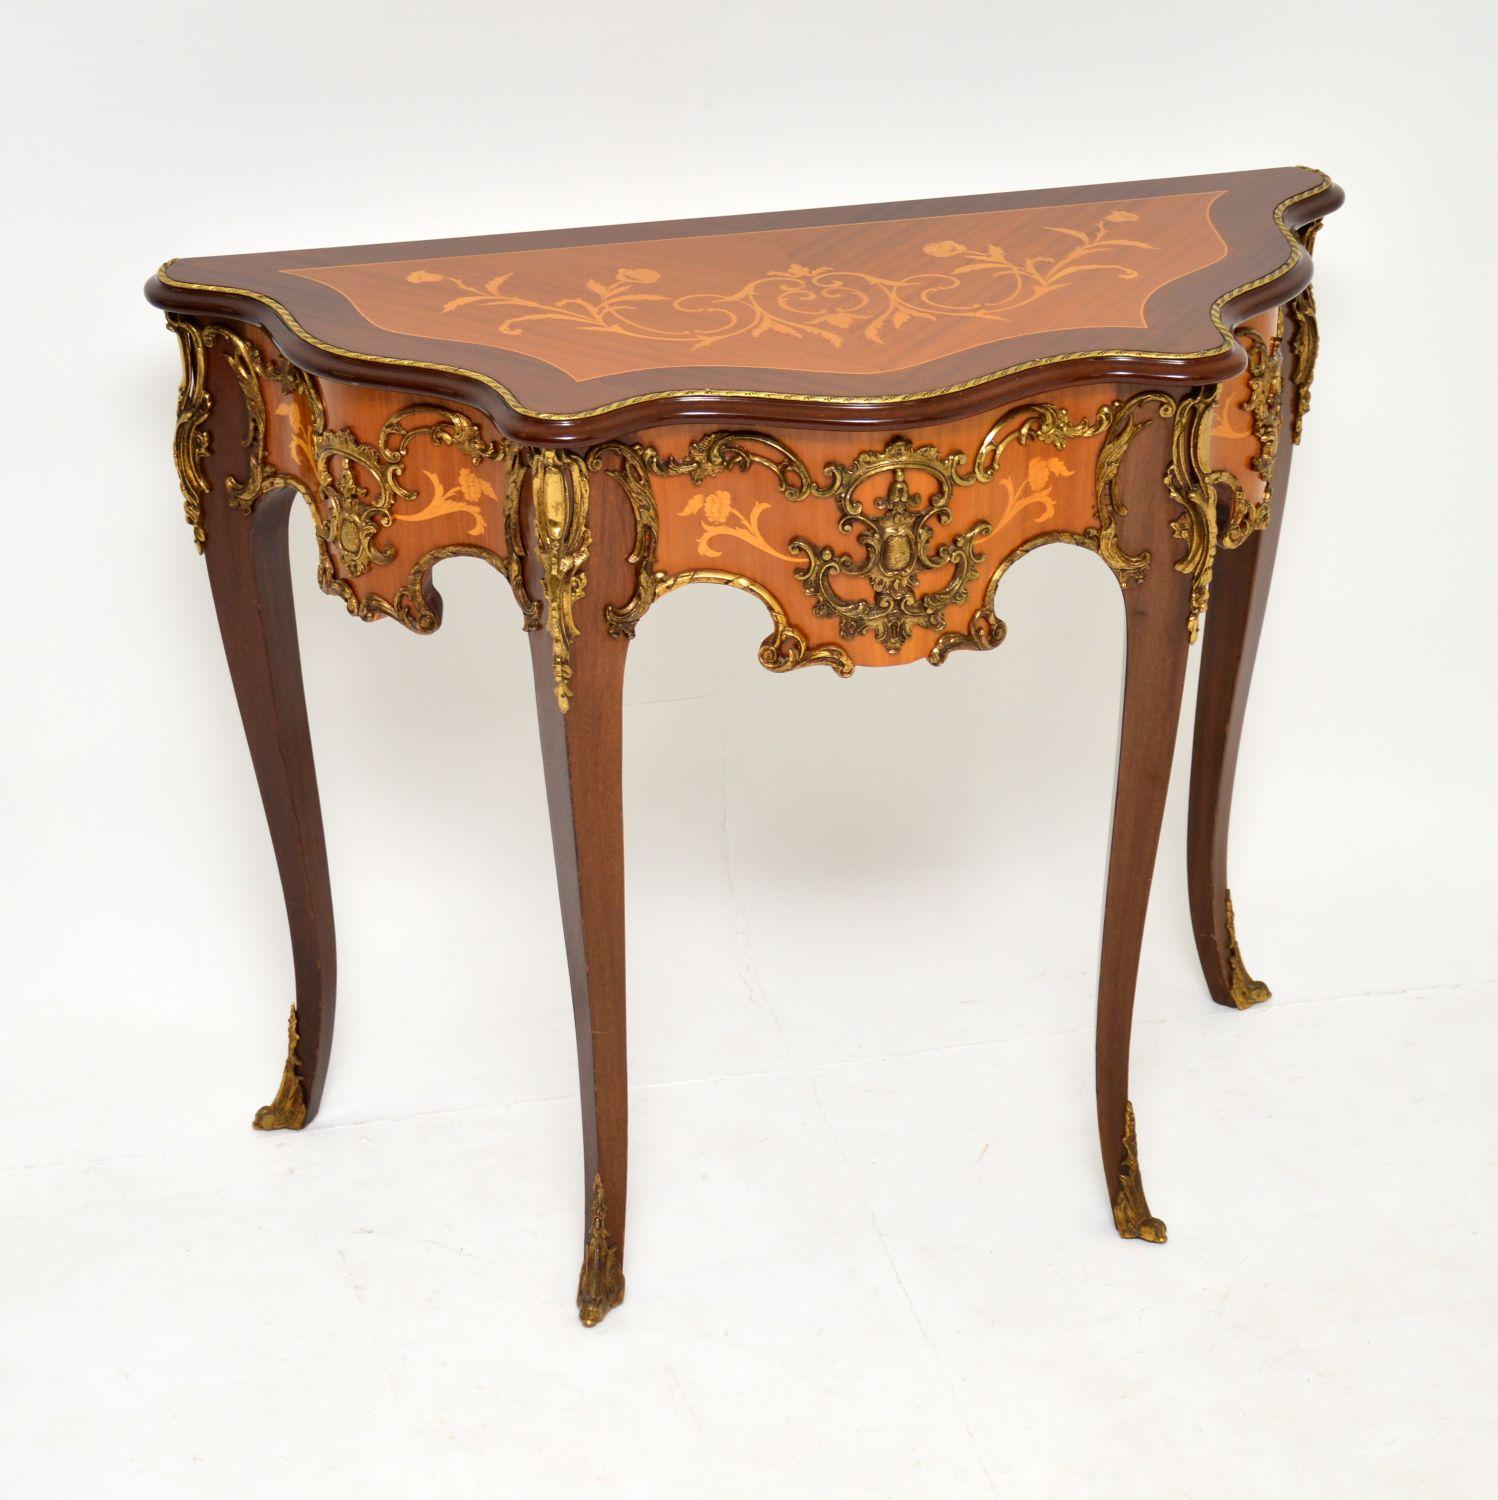 An absolutely stunning console table in the antique French style, this dates from circa 1930s period.

It is of amazing quality, with fine quality gilt bronze mounts around the frieze, top edge and feet. This is made from king wood and mahogany,